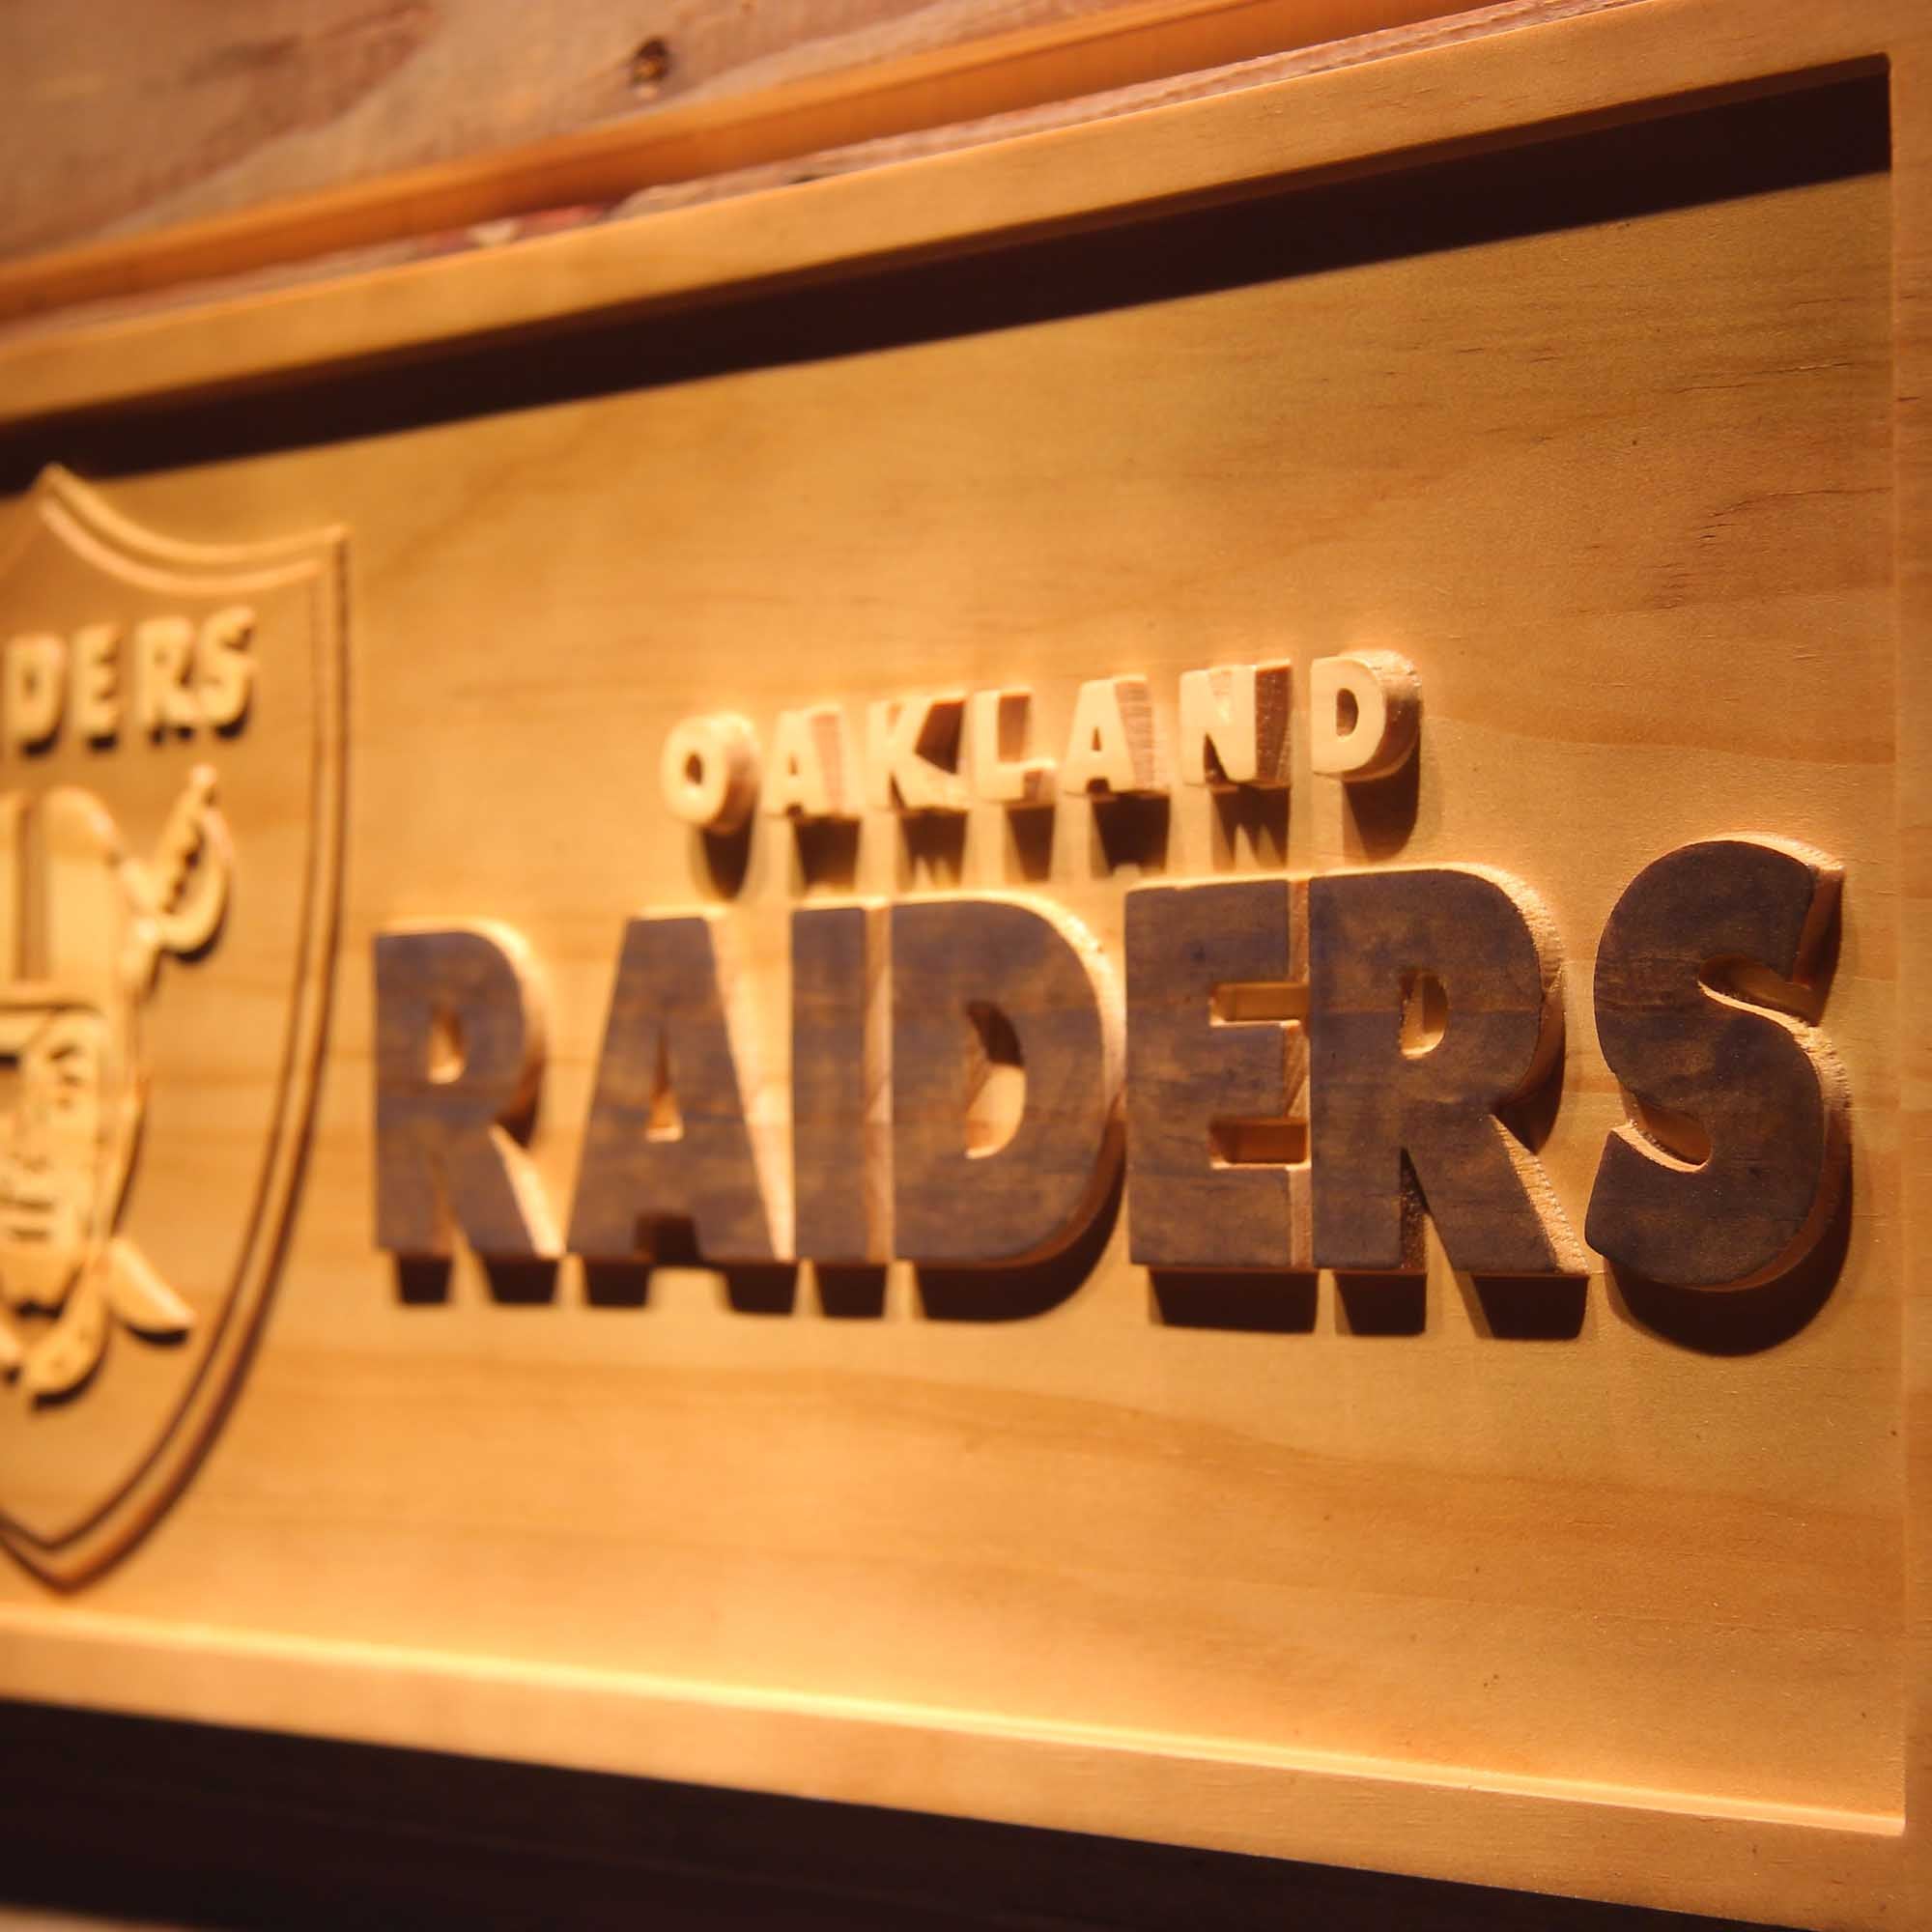 Oakland Raiders,nfl 3D Solid Wooden Craving Sign